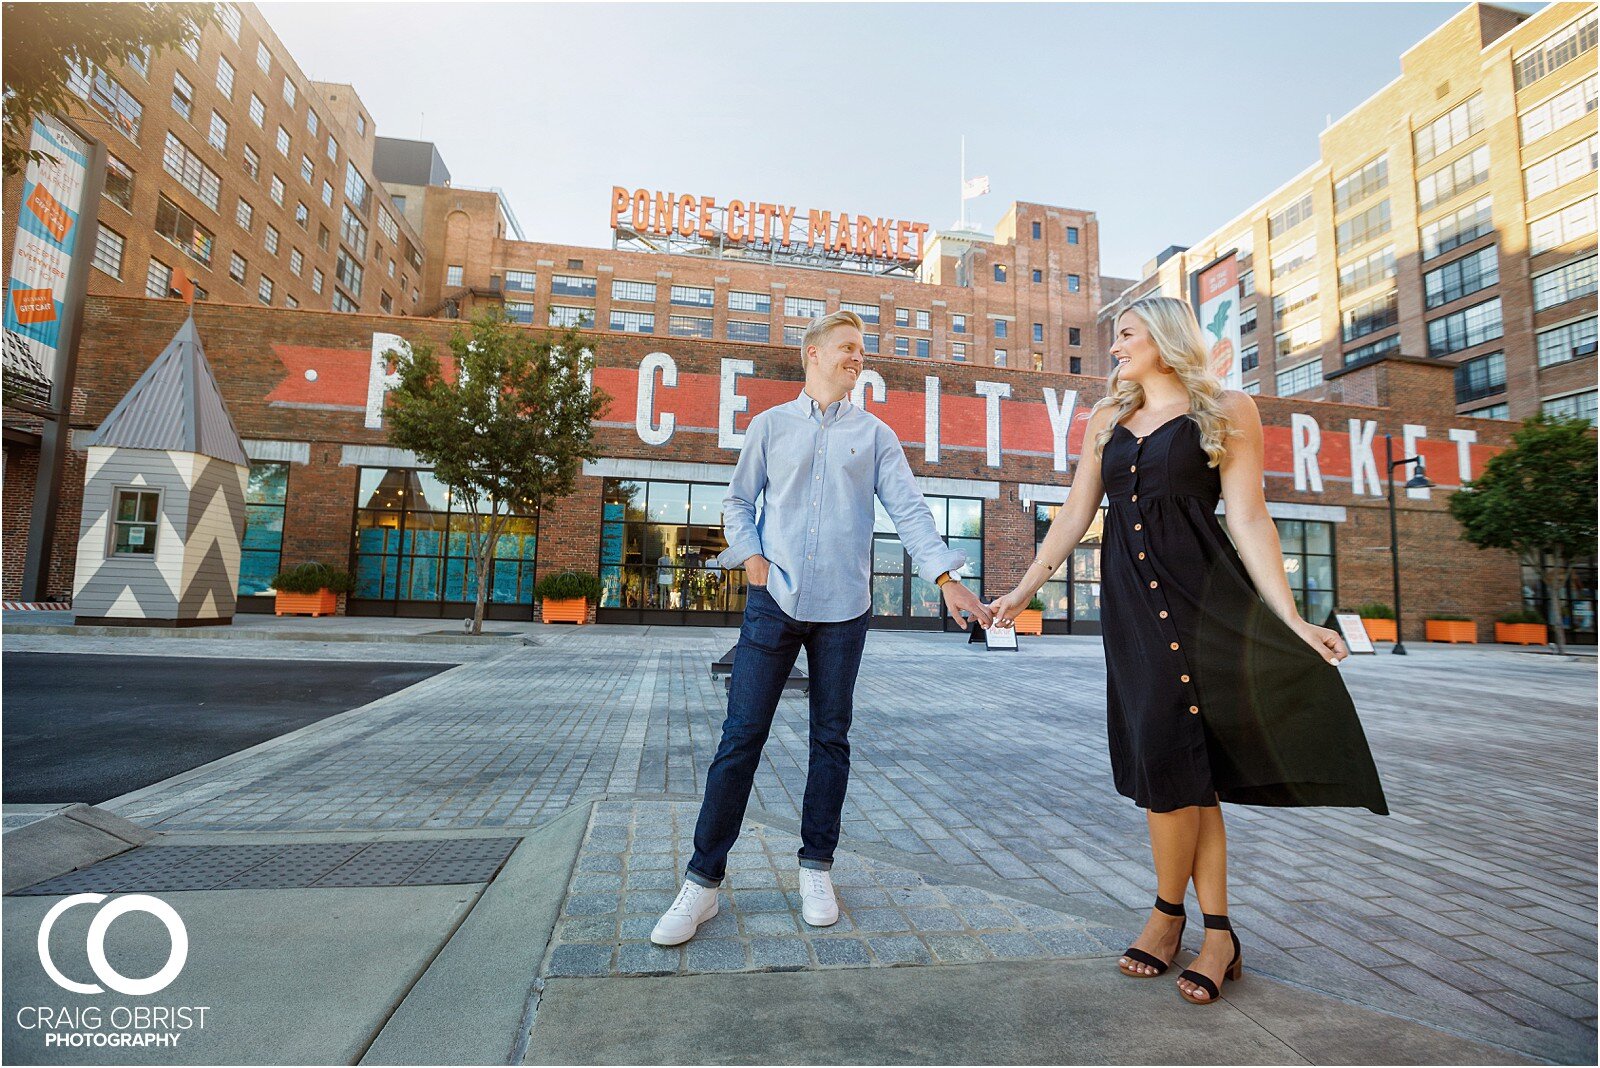 Cator Woolford Ponce city market rooftop sunset engagement portraits atlanta_0037.jpg